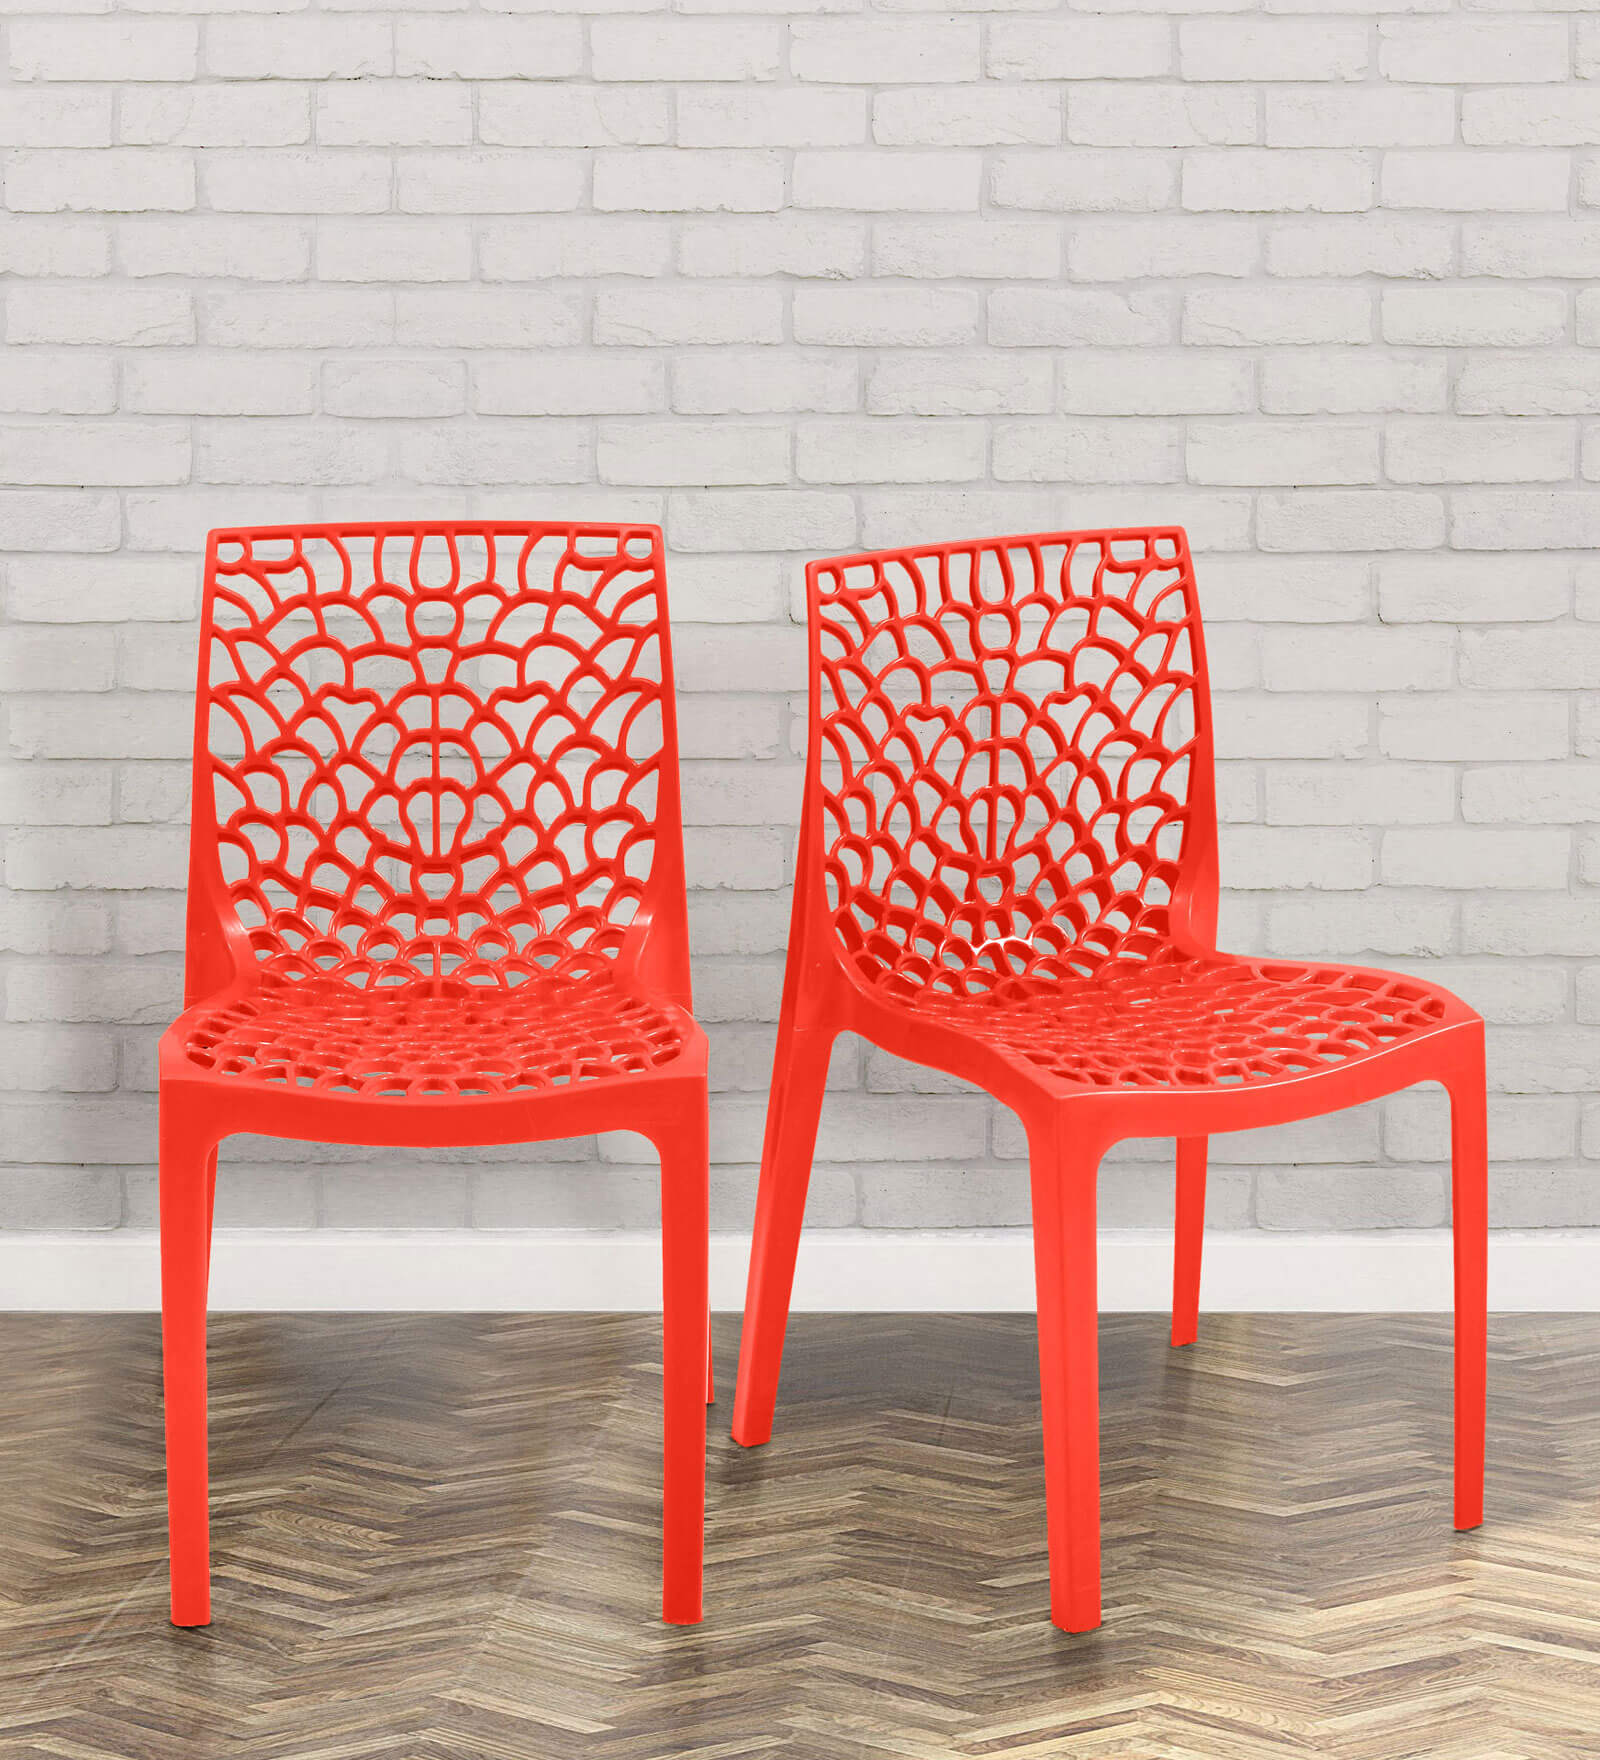 Web Set of 2 Plastic Cafeteria Chairs in Red Colour